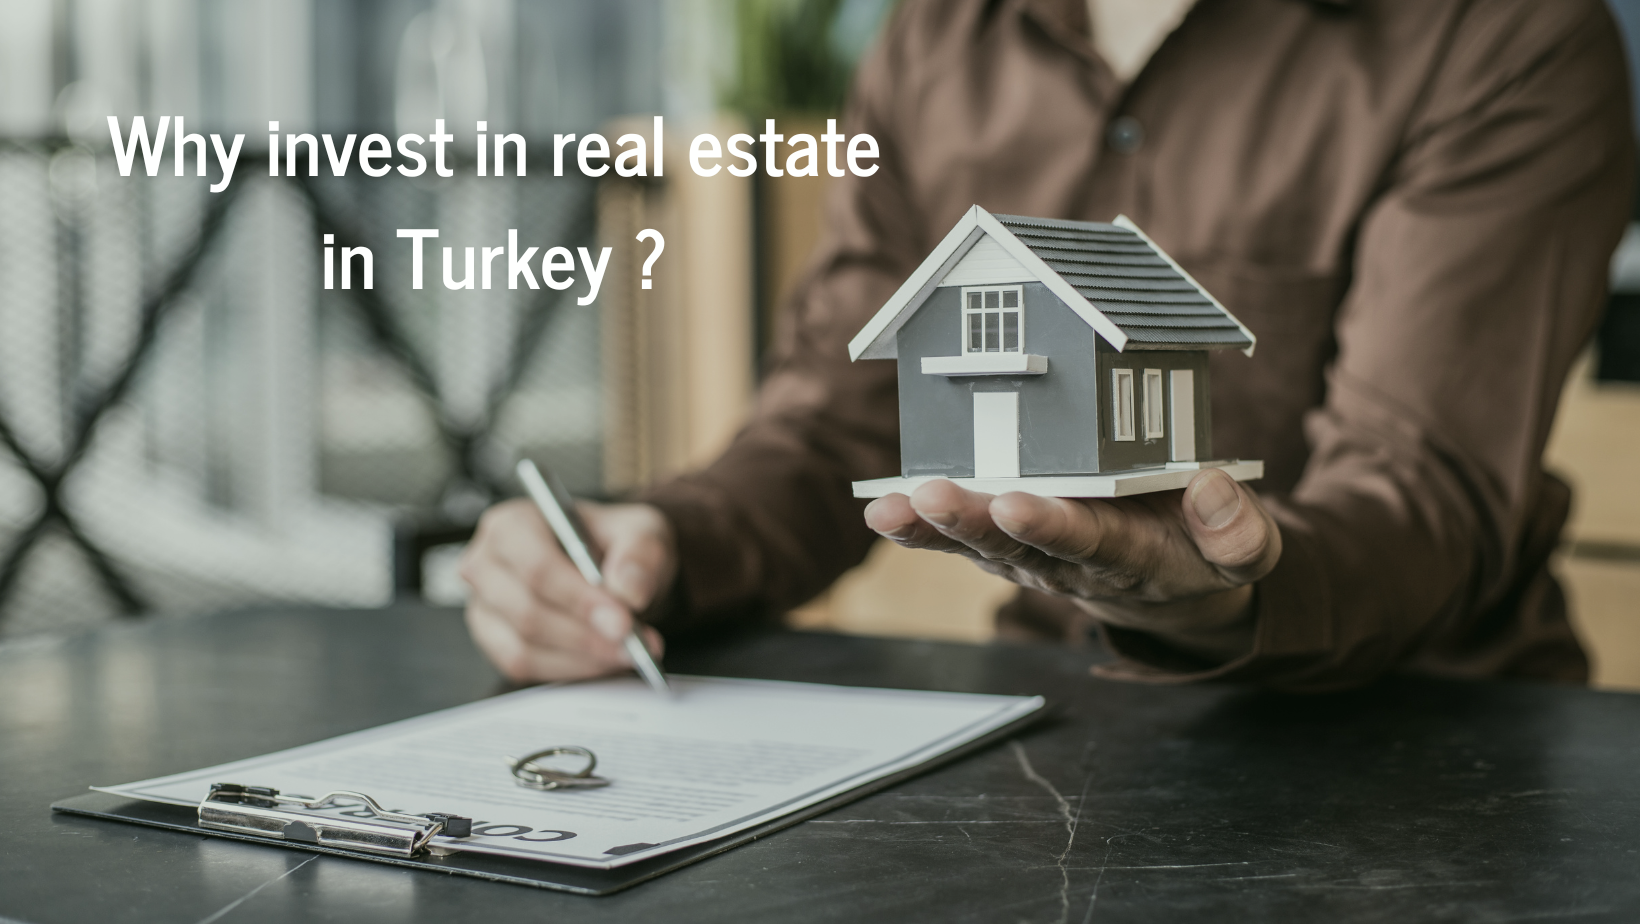 Why invest in real estate in Turkey?